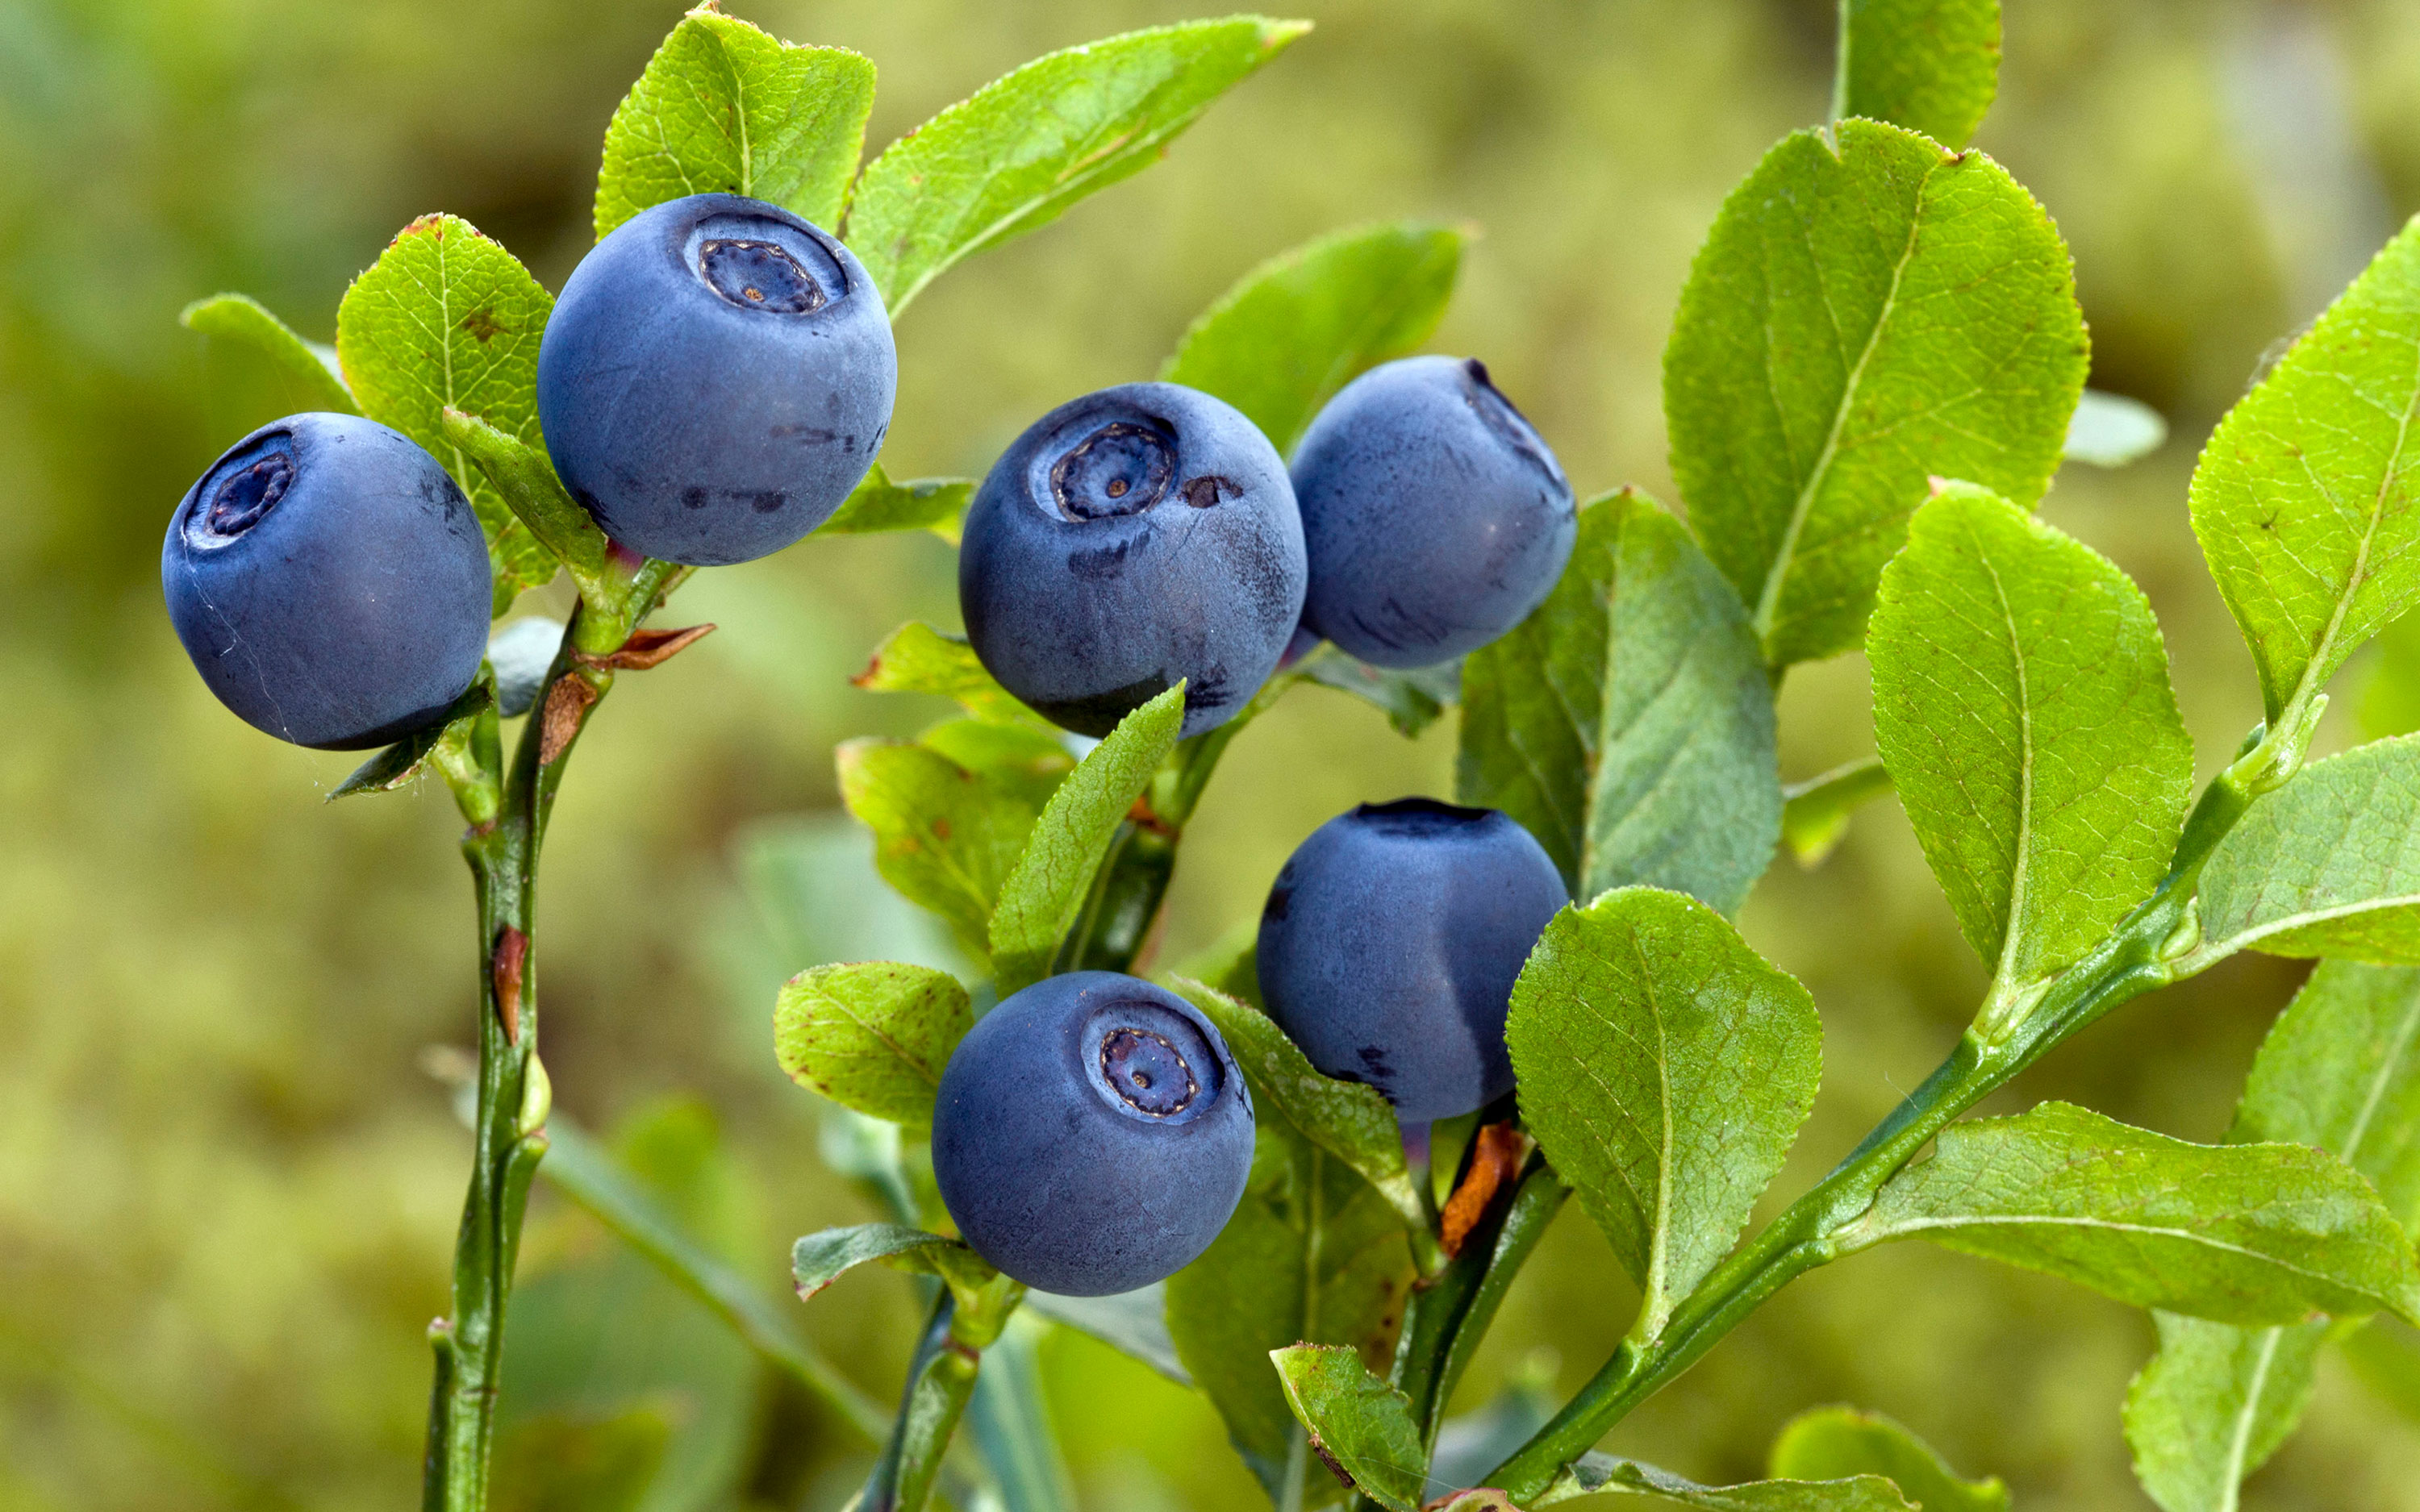 Close up of blueberries.